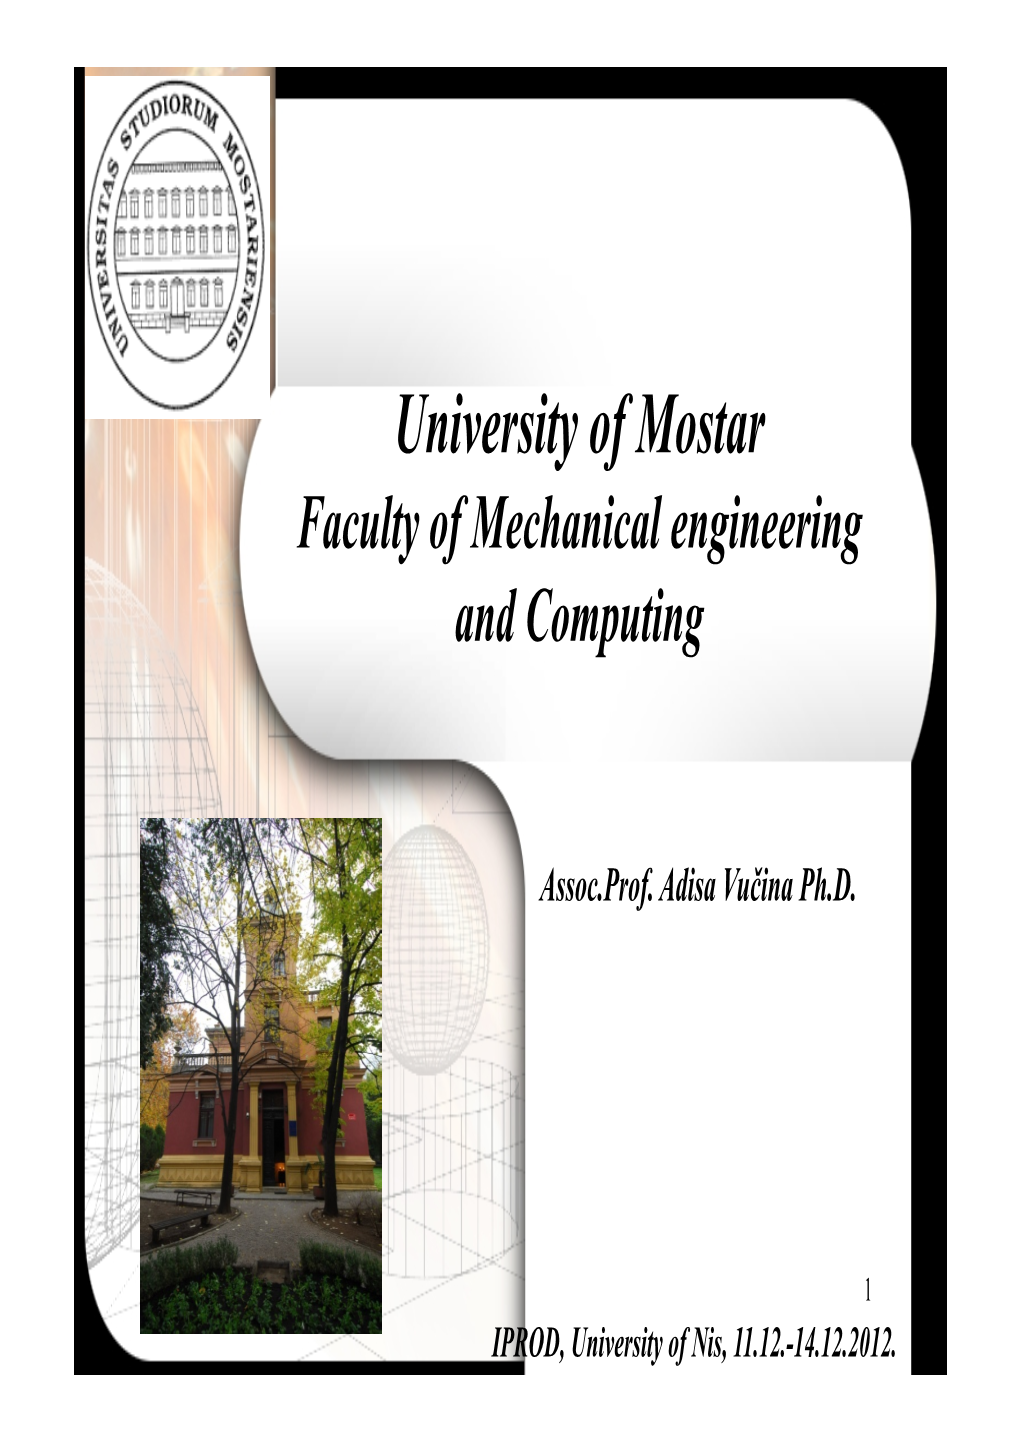 University of Mostar, Faculty of Mechanical Engineering and Computing